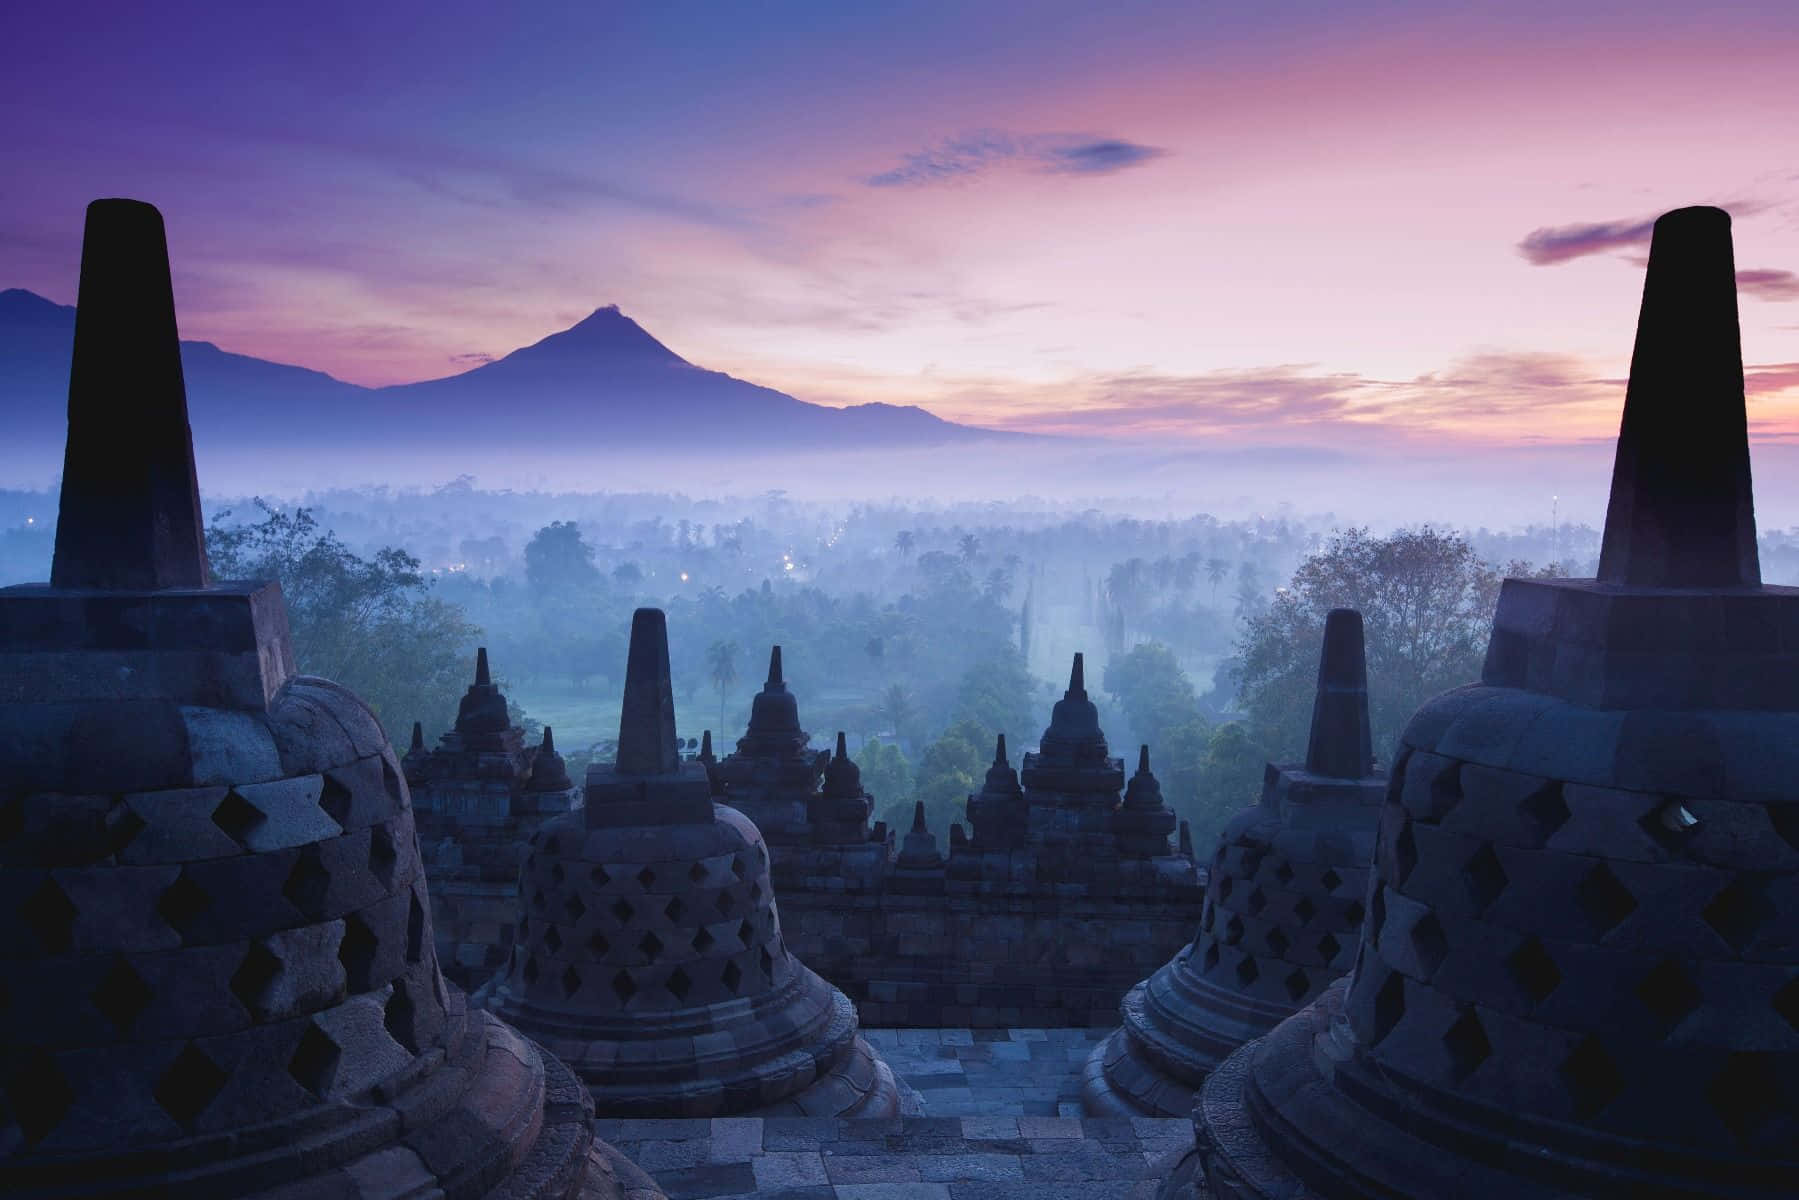 Magnificent View That The Borobudur Temple Has To Offer Wallpaper